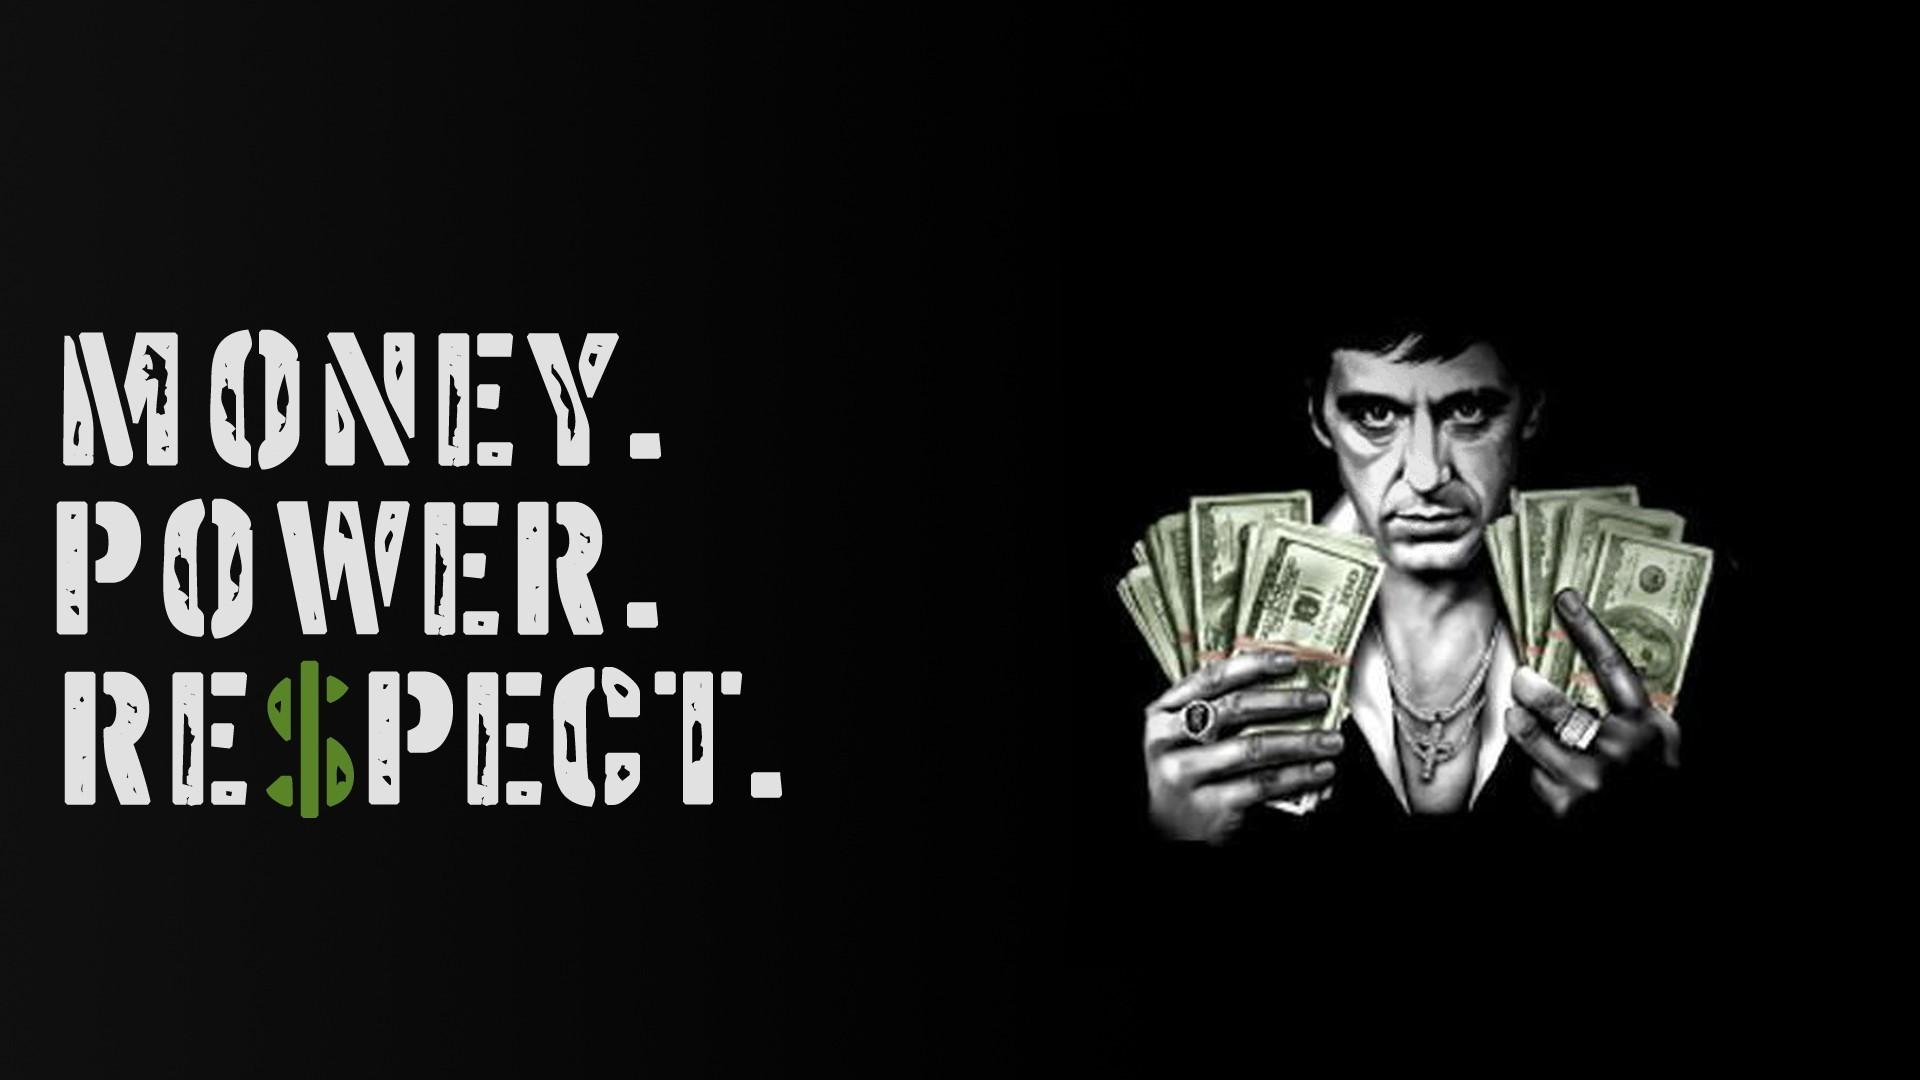 Quotes Scarface Monochrome Al Pacino Gangster Wallpaper